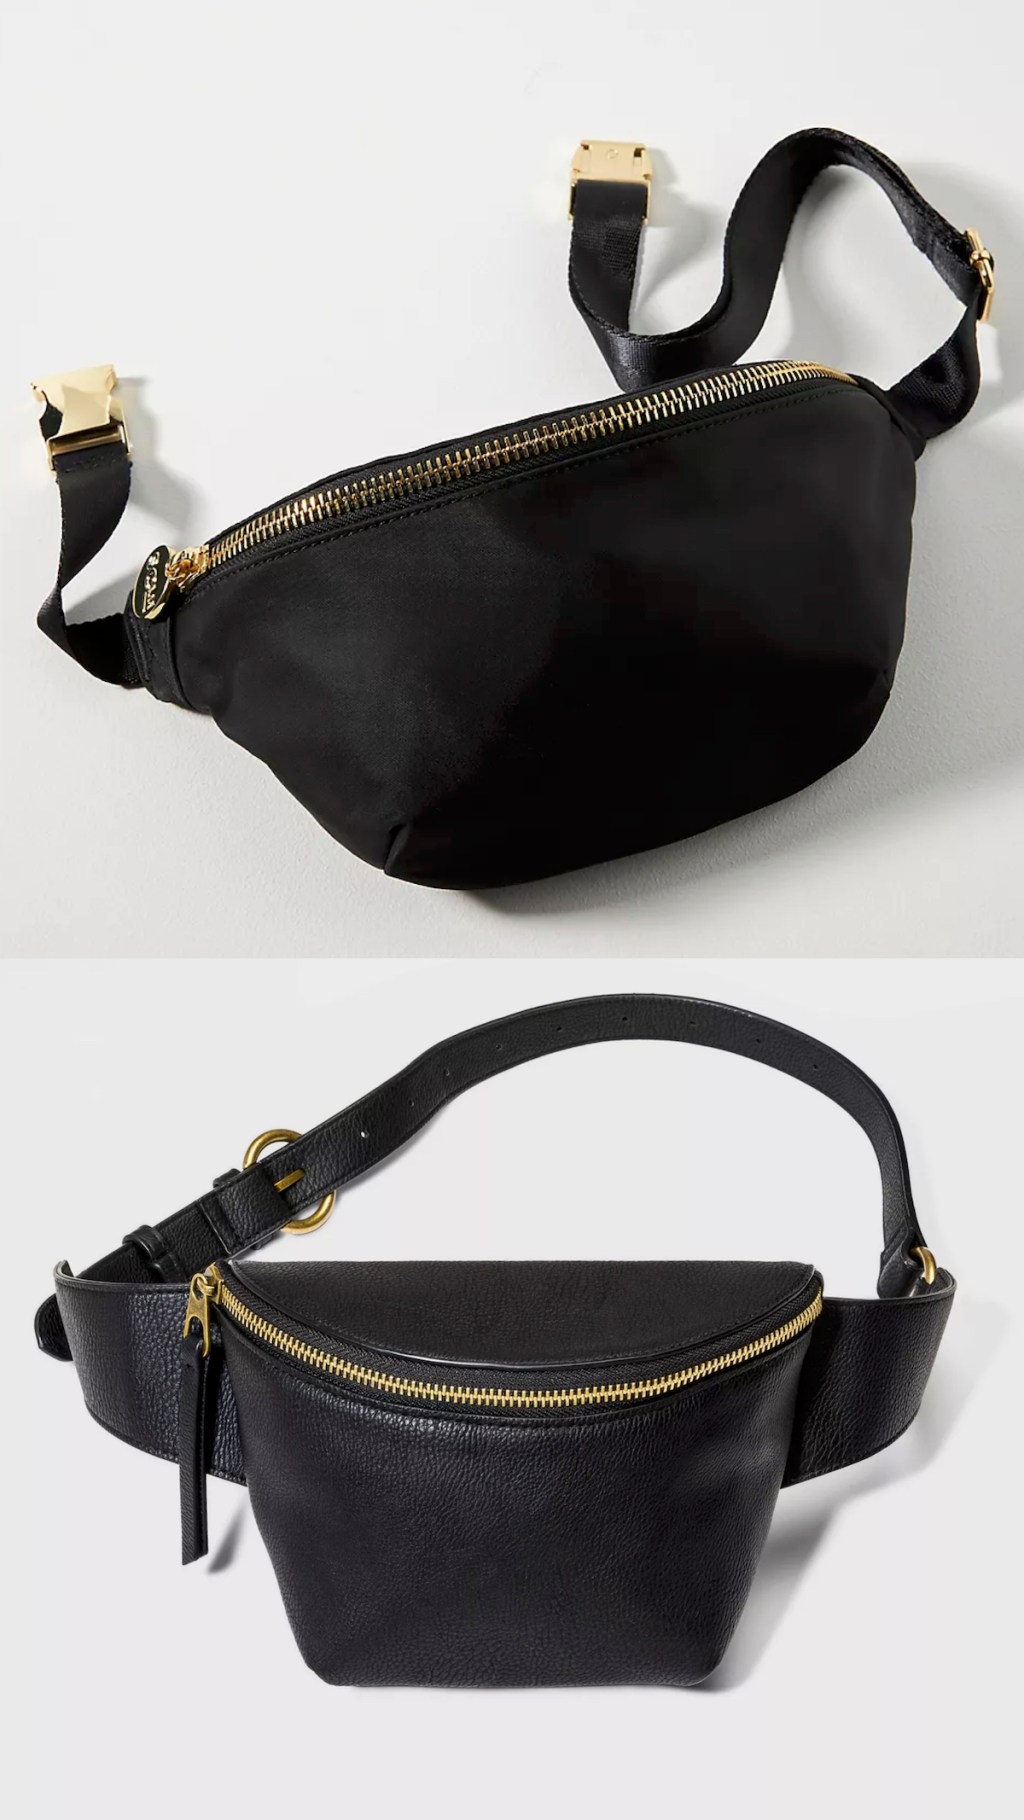 two black and gold fanny pack belt bags anthropologie dupes